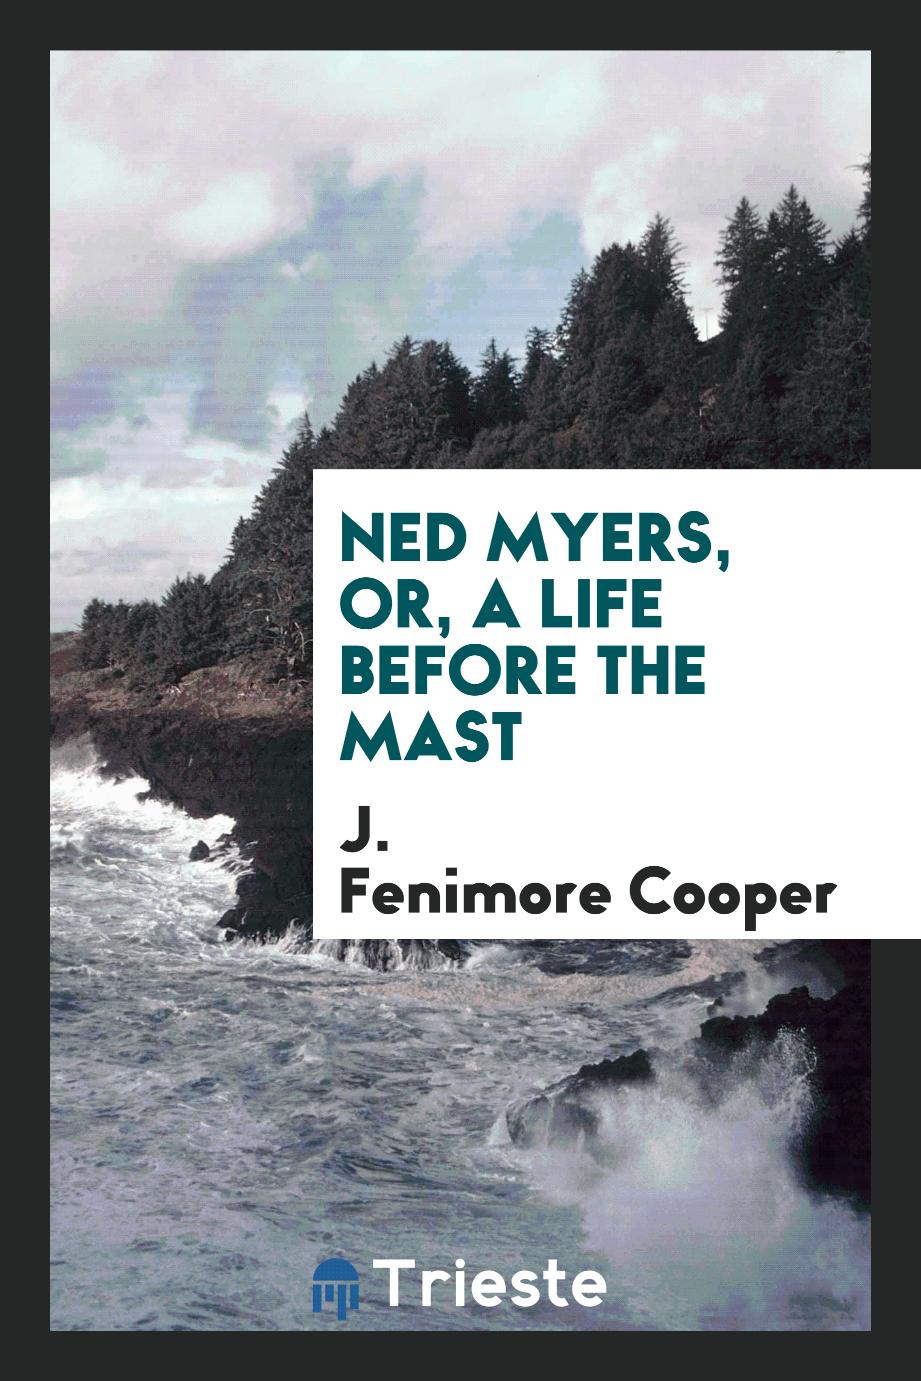 Ned Myers, or, A life before the mast